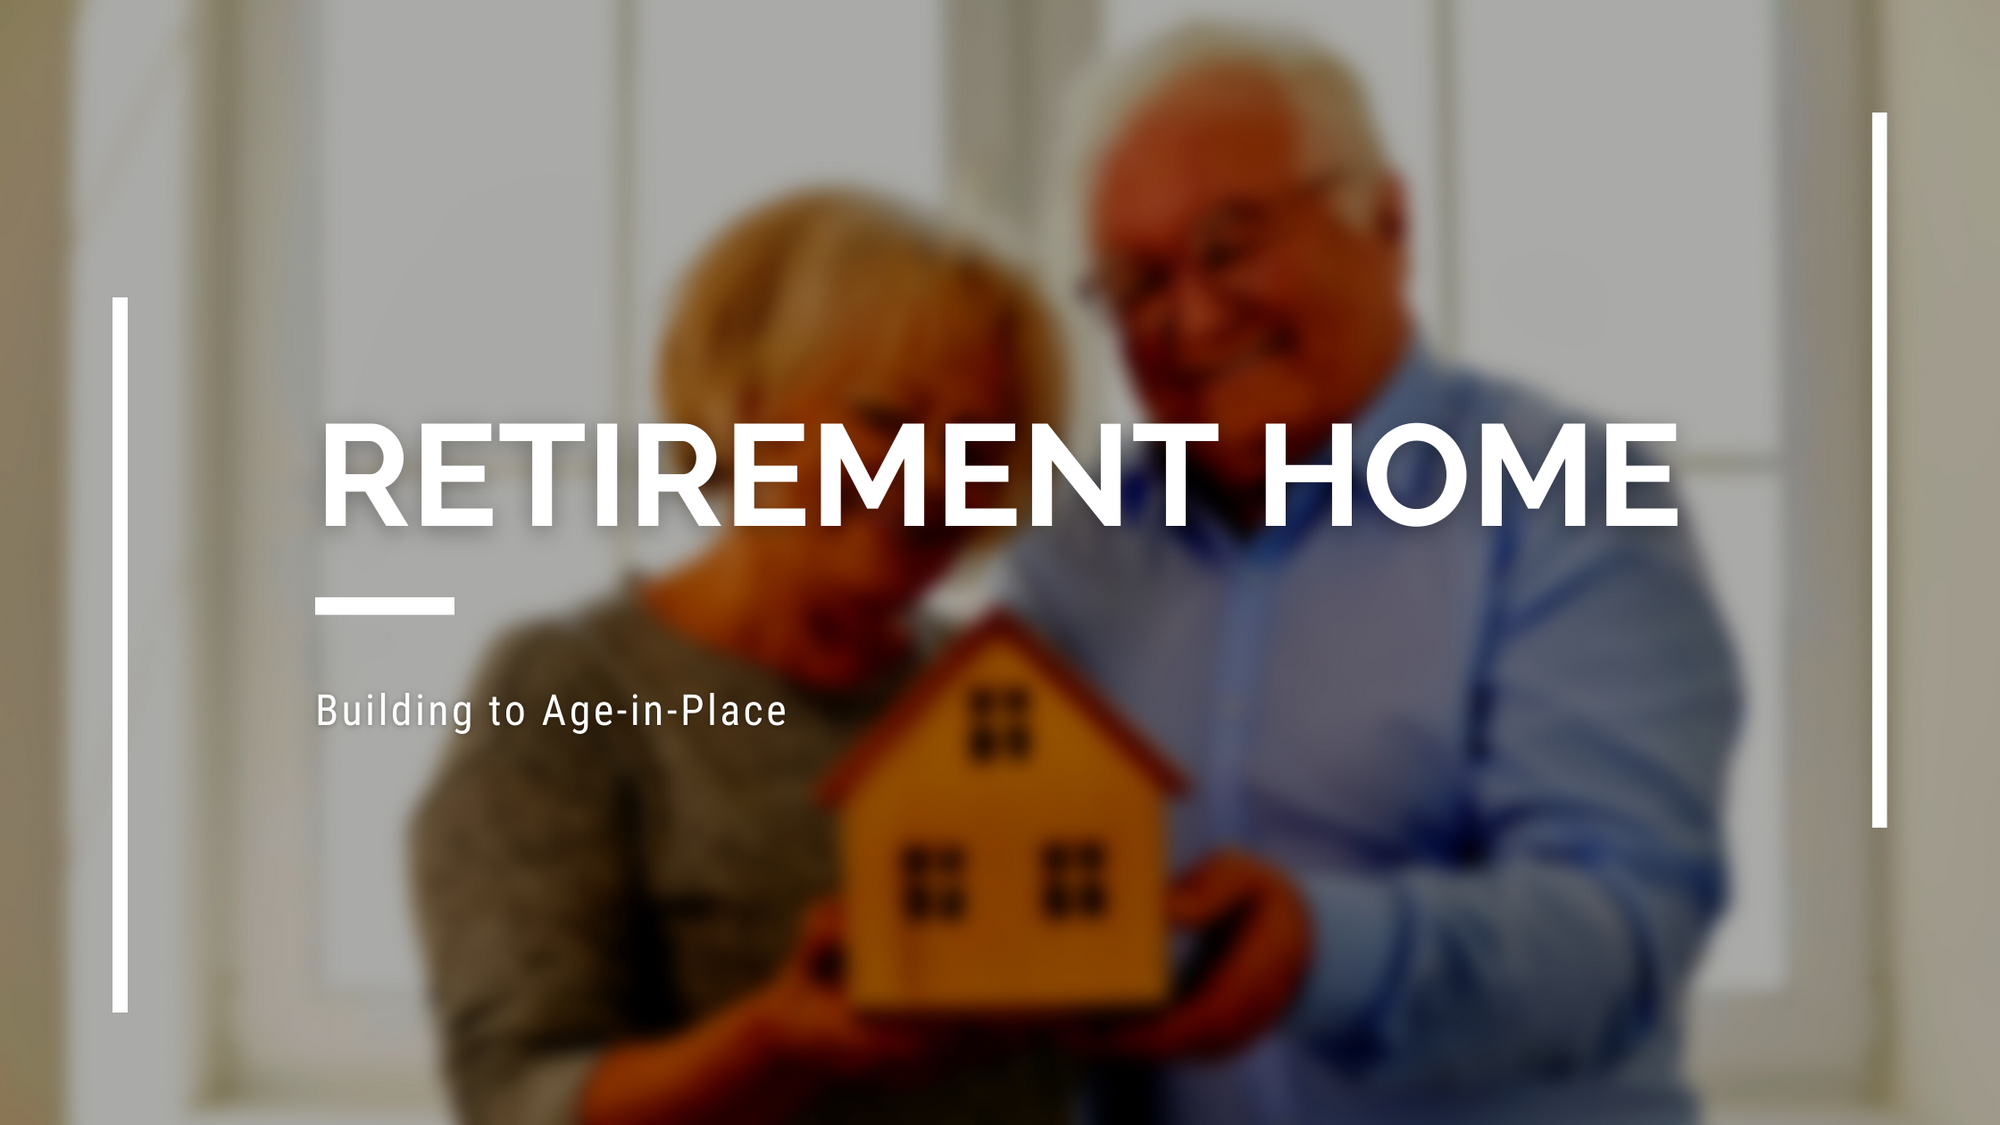 Retirement Home: Building to Age-in-Place